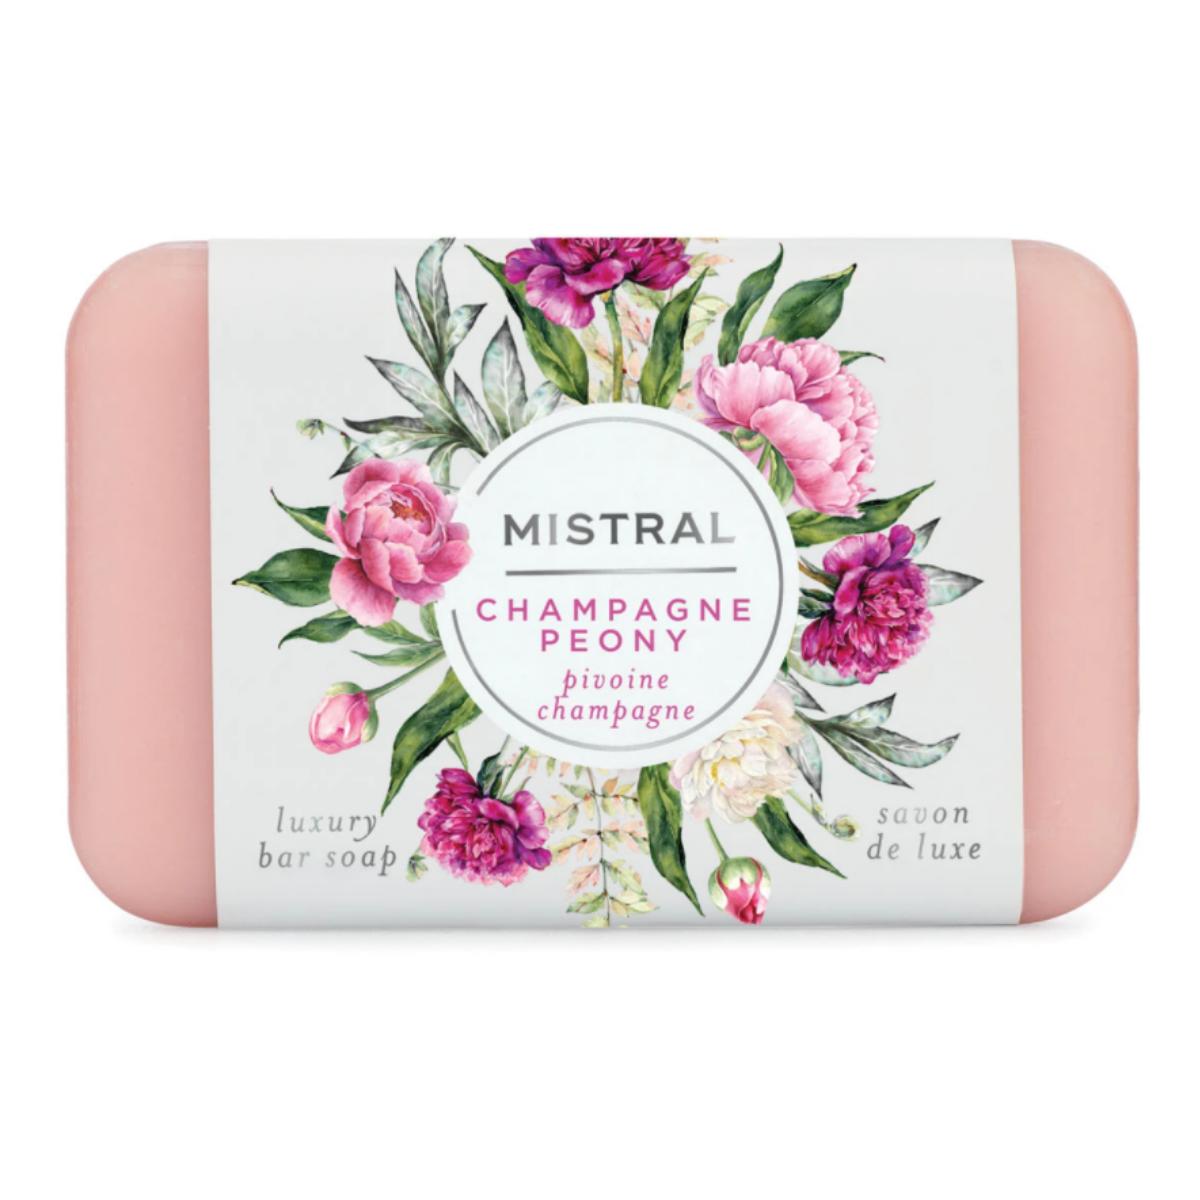 Primary image of Champagne Peony Bar Soap